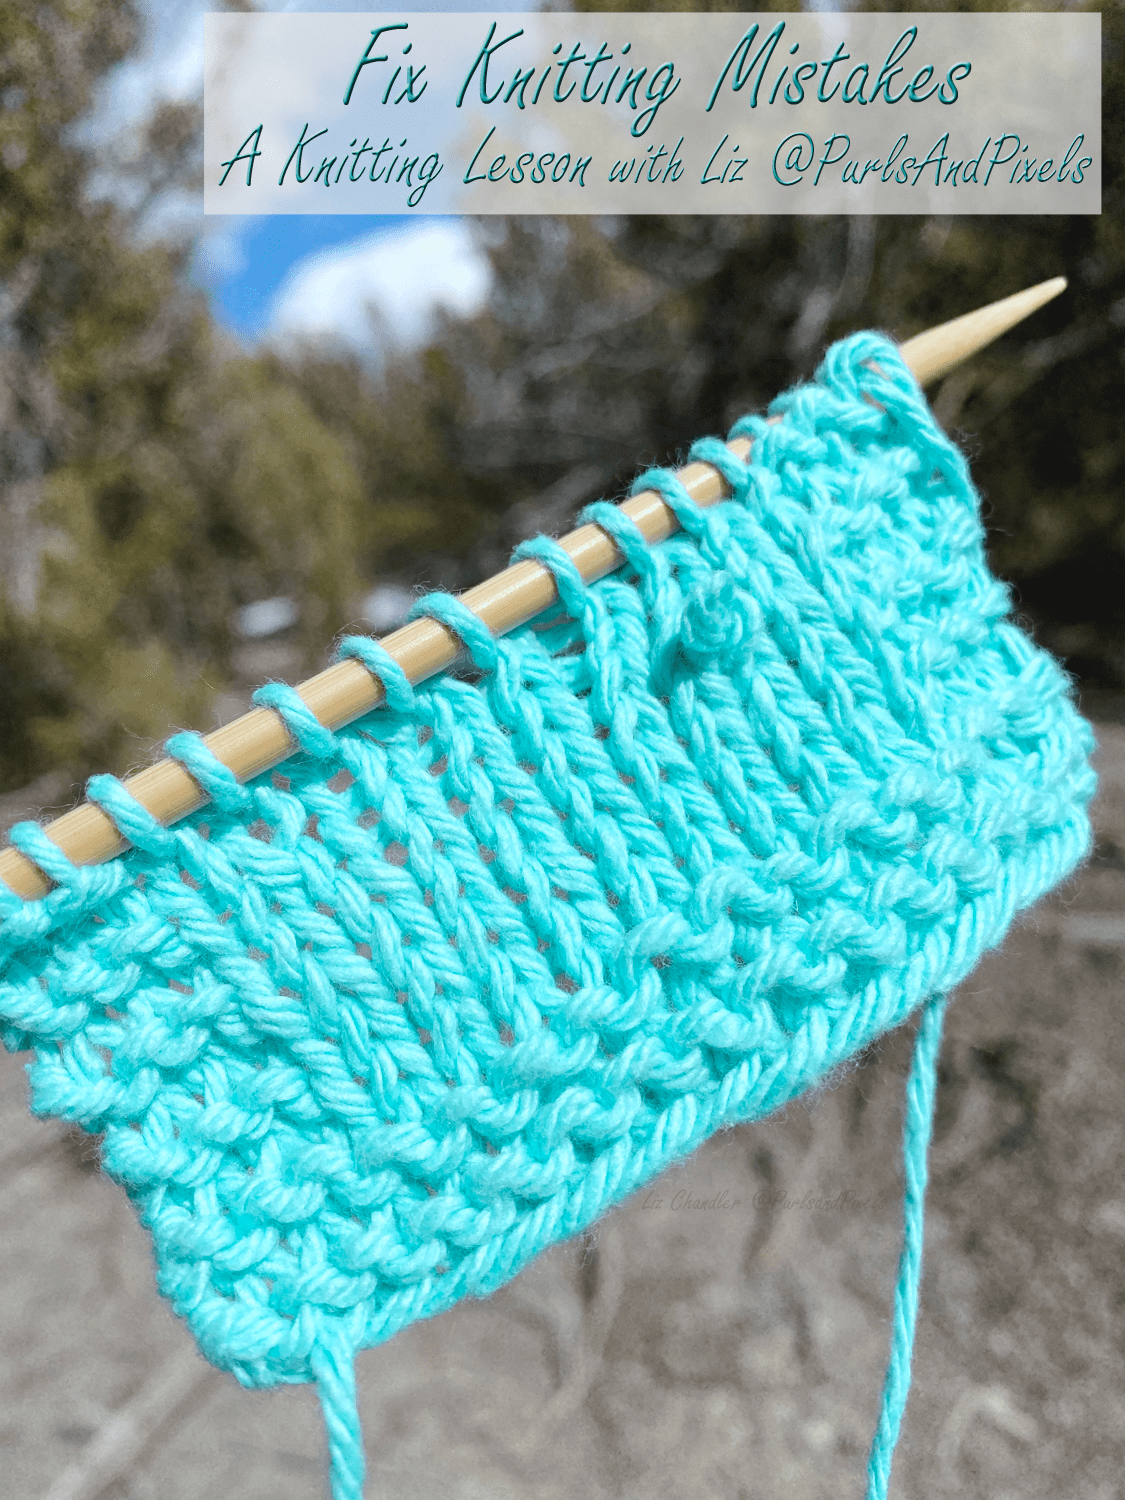 Fix Knitting Mistakes